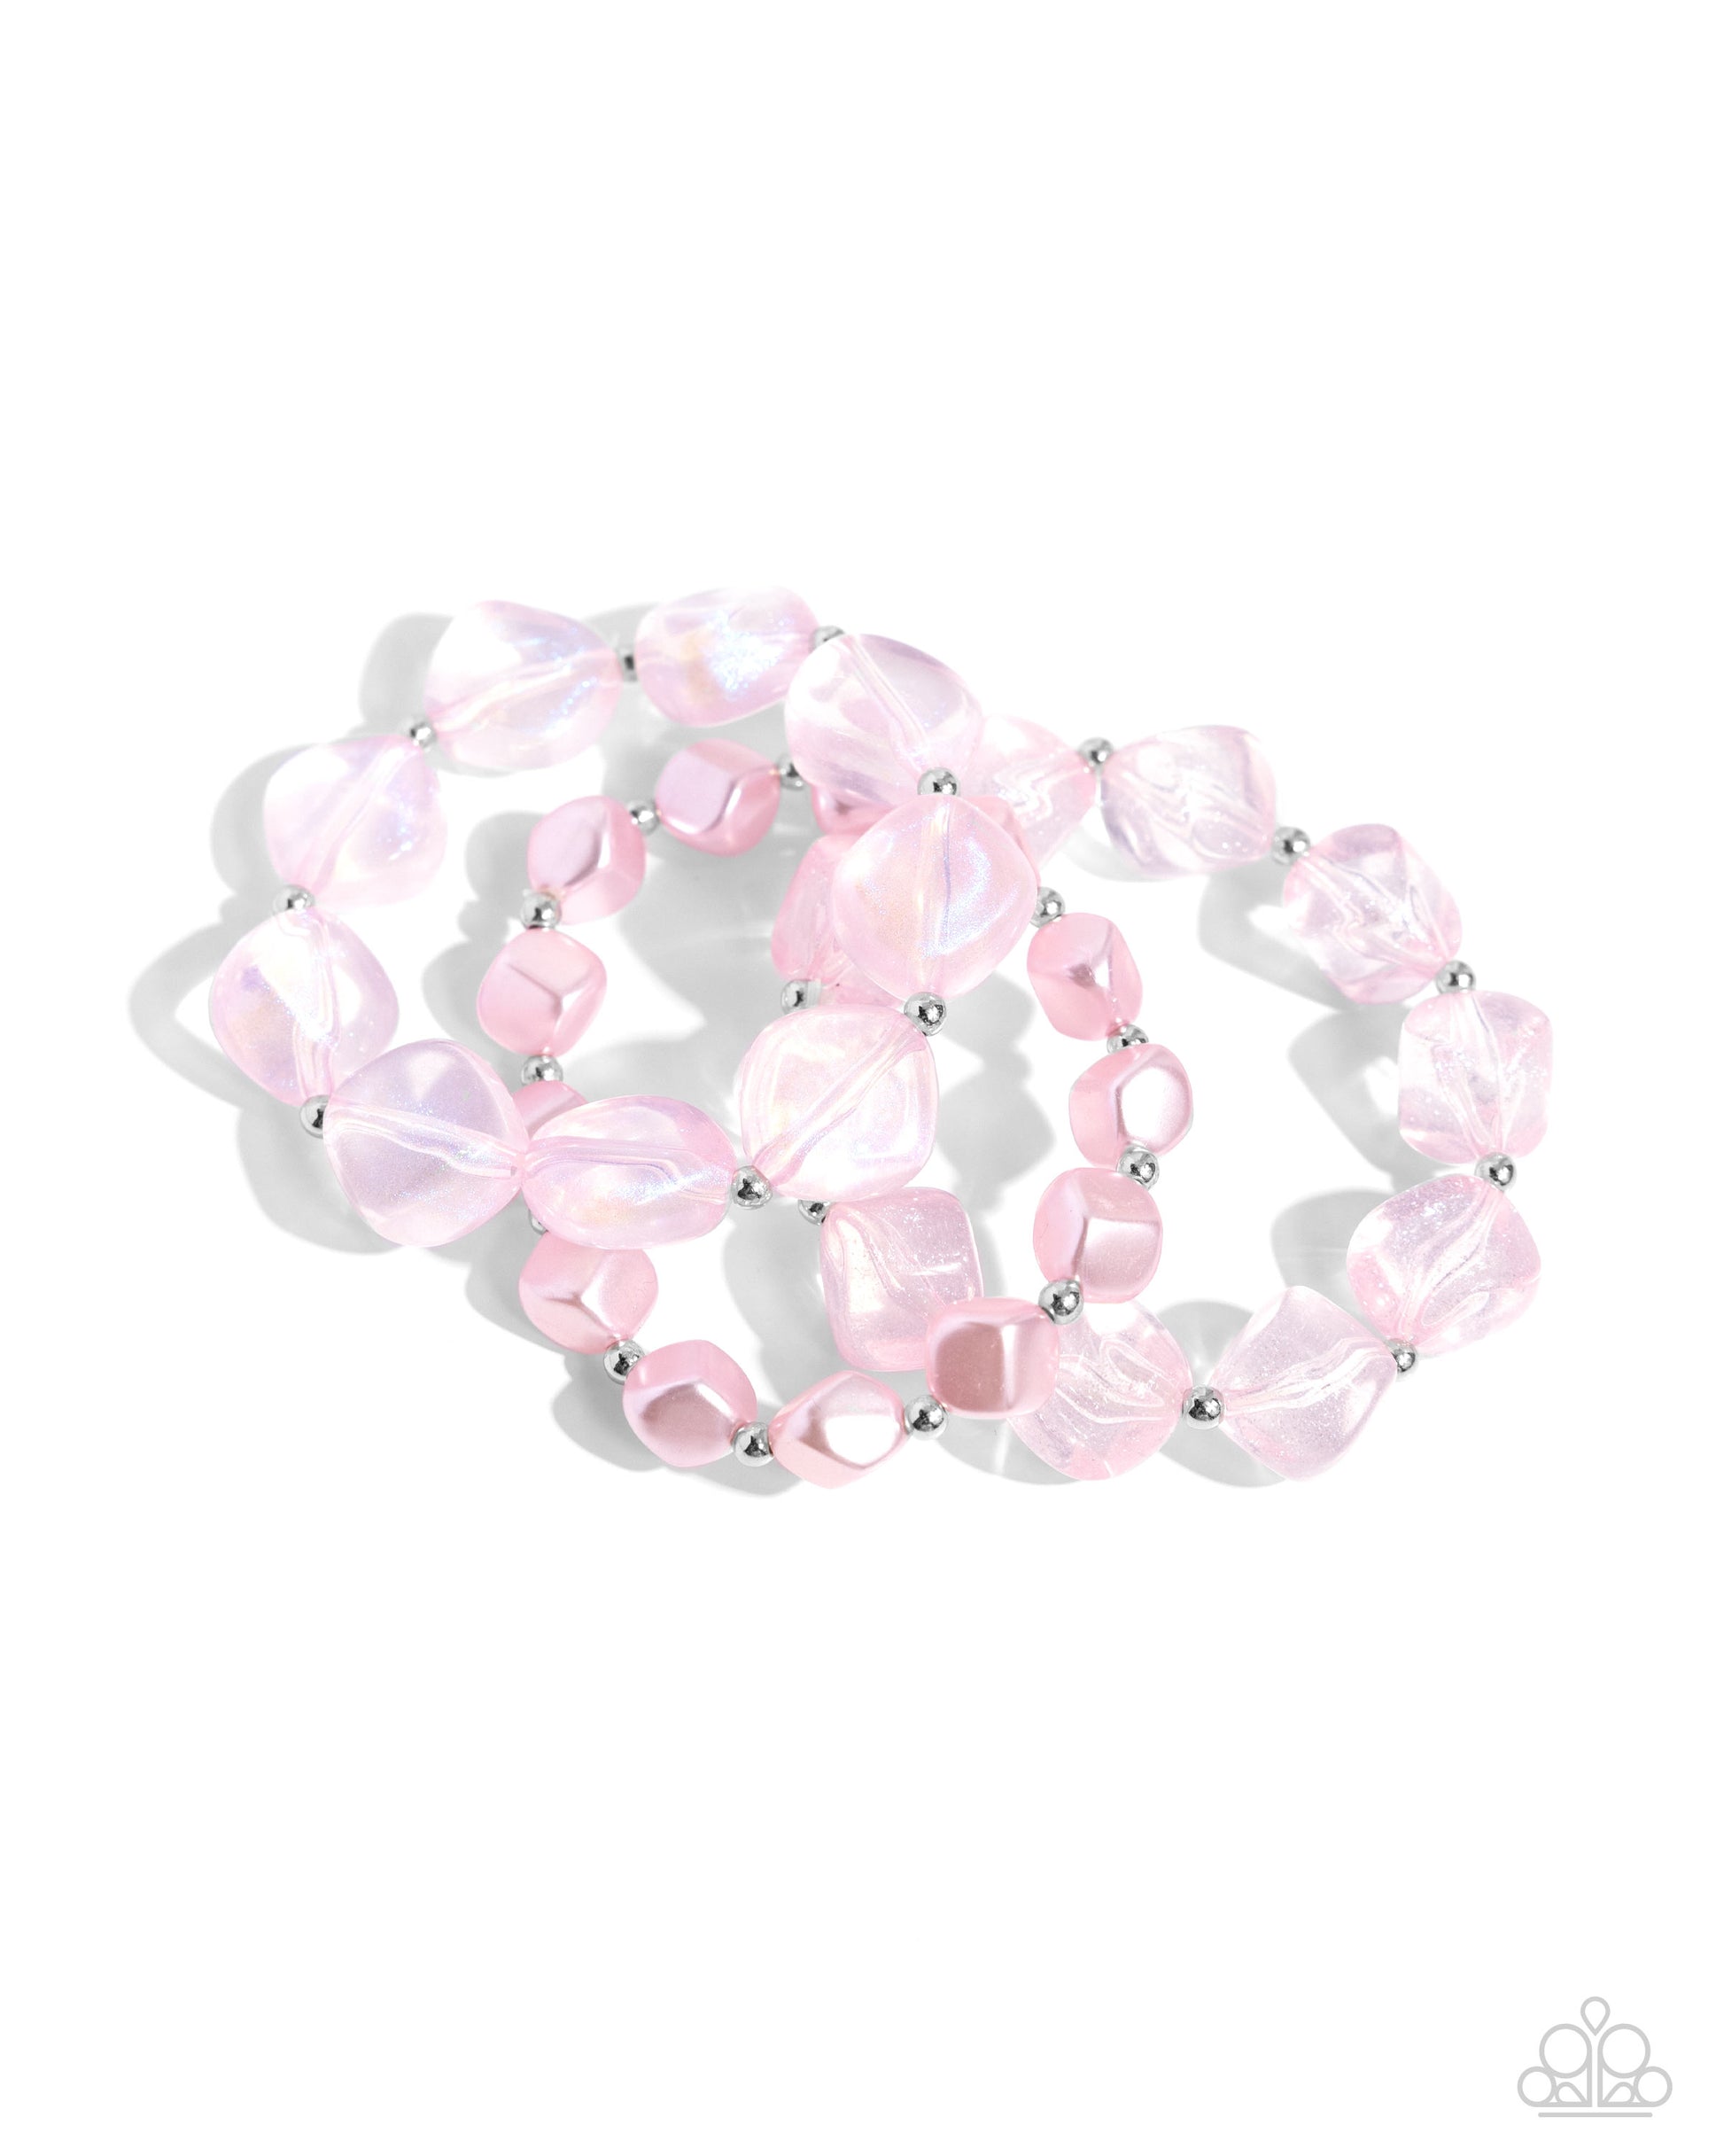 Glittery Gala Pink Stretch Bracelet - Paparazzi Accessories Cubed baby pink pearls join a strand of baby pink acrylics and glittery acrylics that alternate with silver beads along elastic stretchy bands around the wrist for a sweet stack. Sold as one set of three bracelets. SKU: P9ST-PKXX-028VO Get The Complete Look! Necklace: "Cubed Cameo - Pink" (Sold Separately)